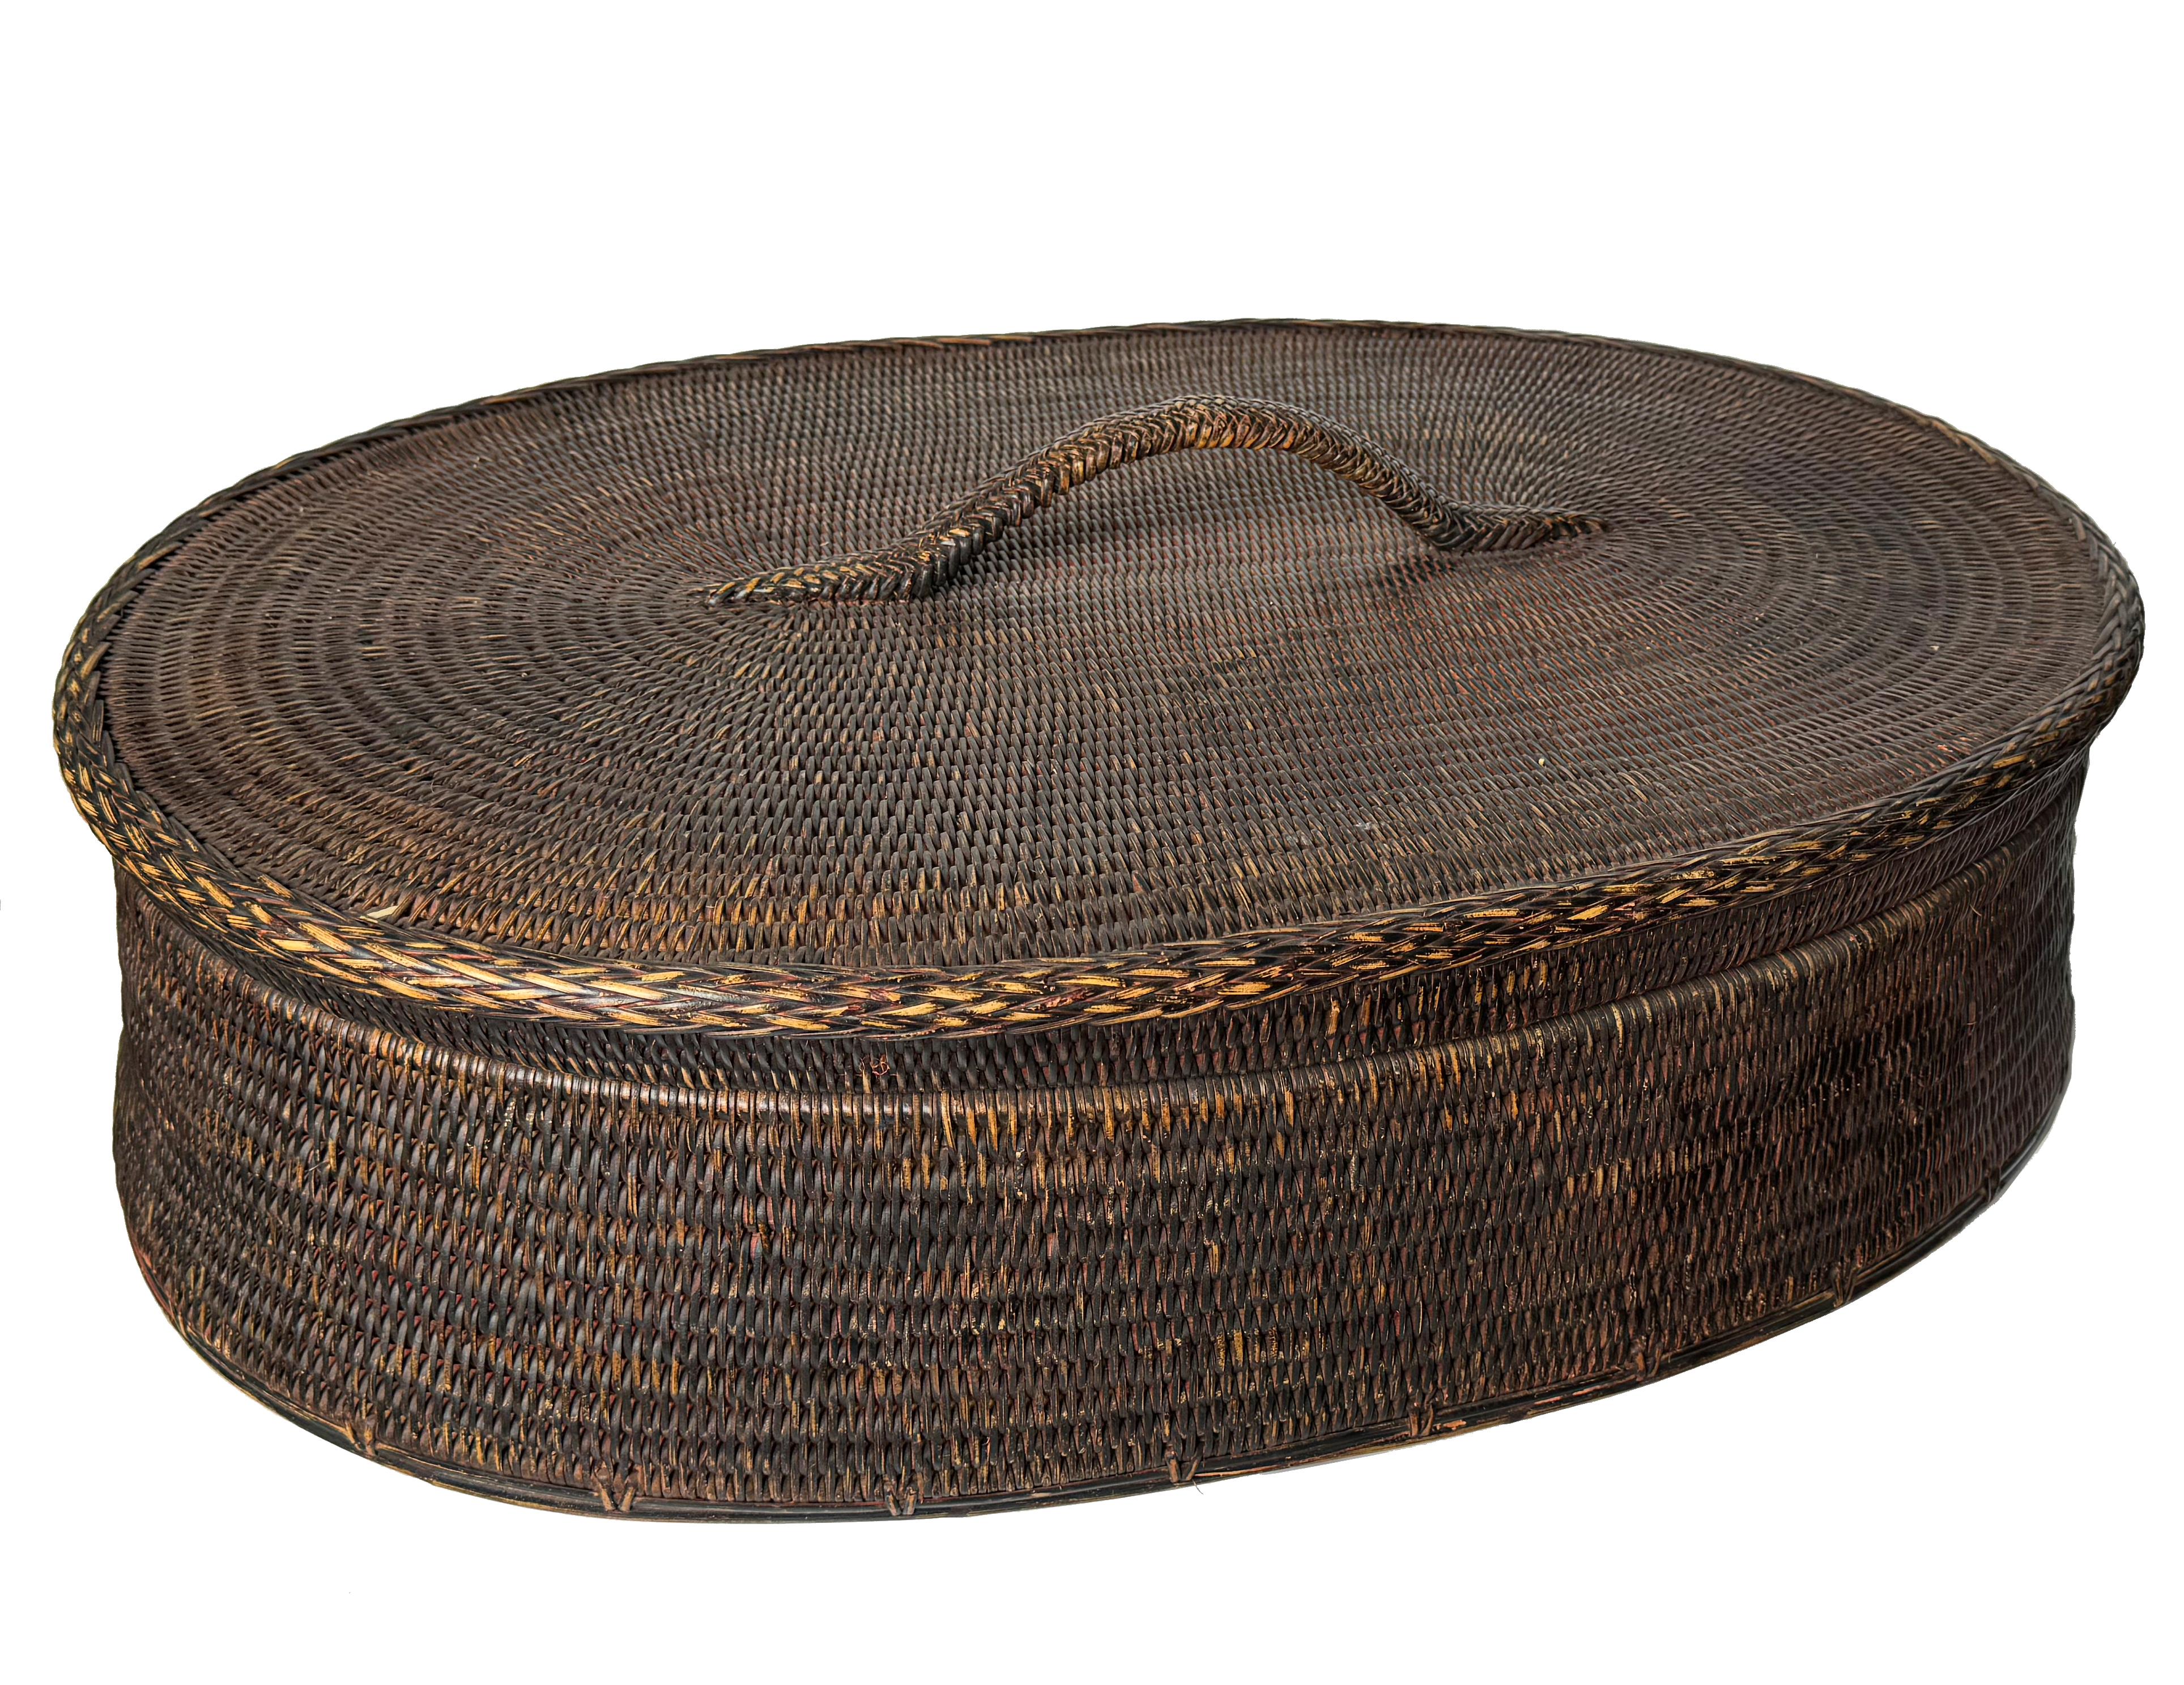 Burmese Decorative and Rustic Big Storage Basket in Rattan and Wood With Lid.   For Sale